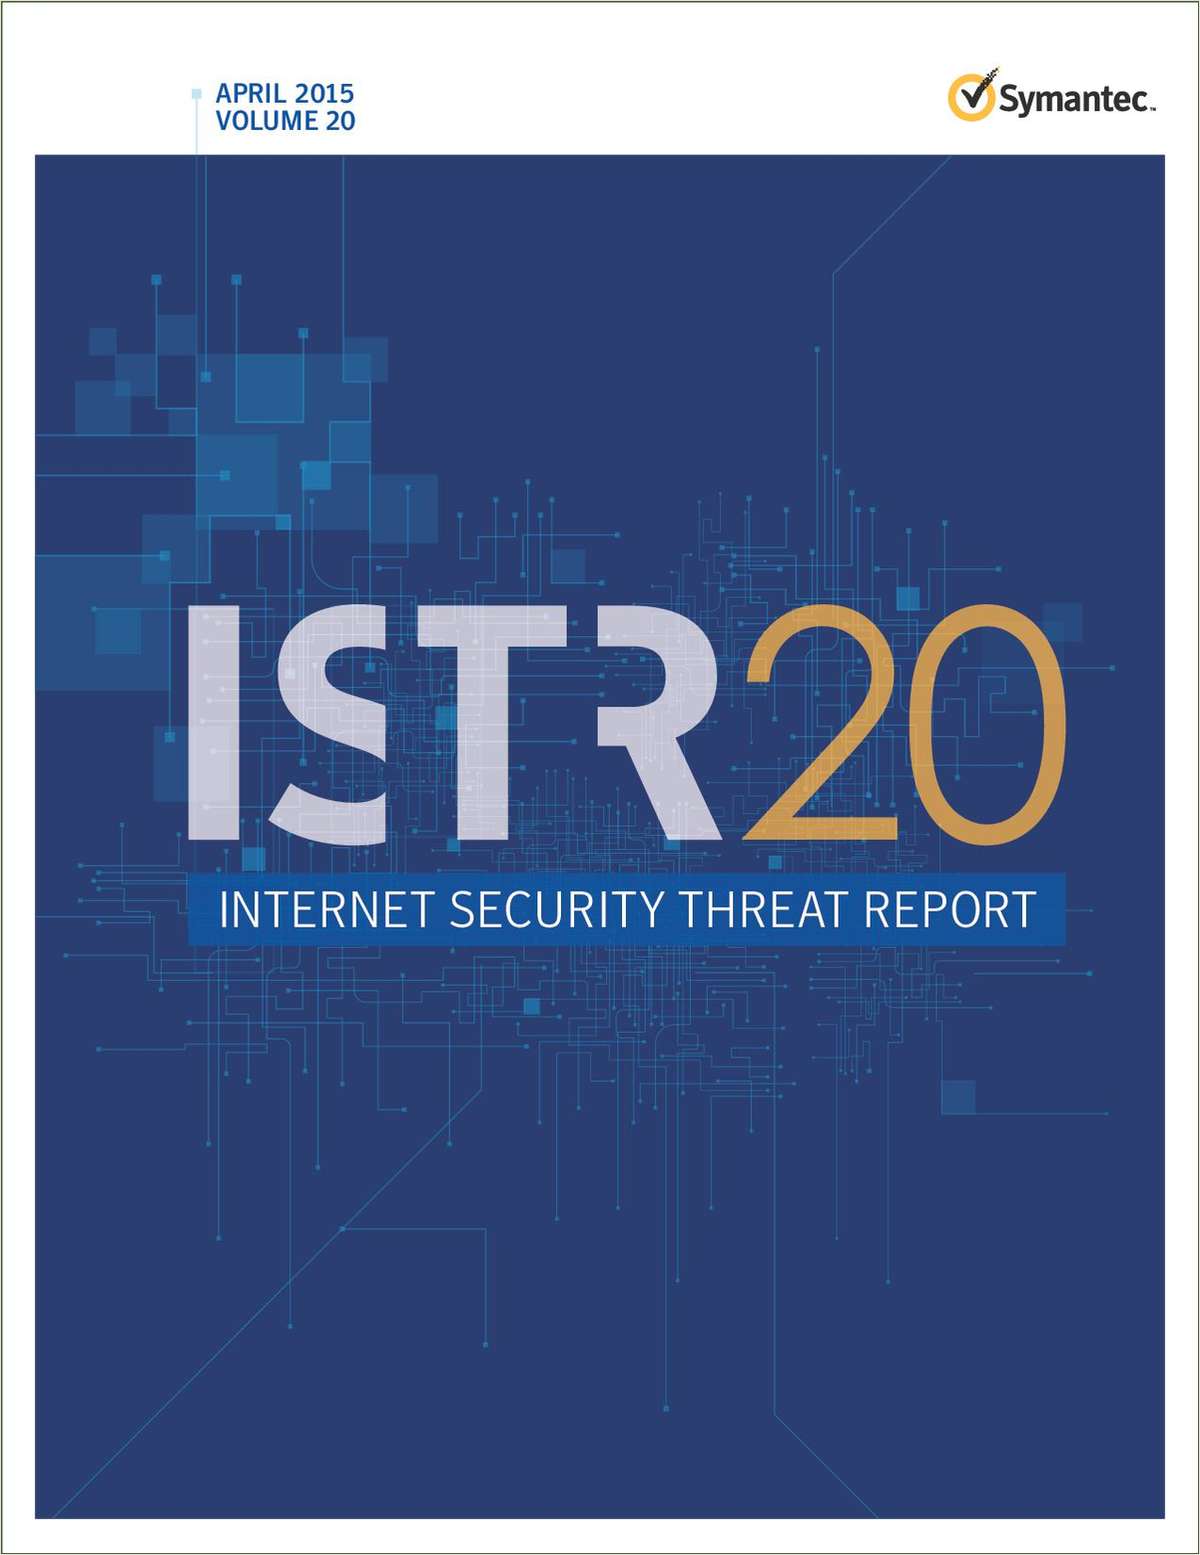 Internet Security Threat Report - Cybercrime: New Tricks of the Trade